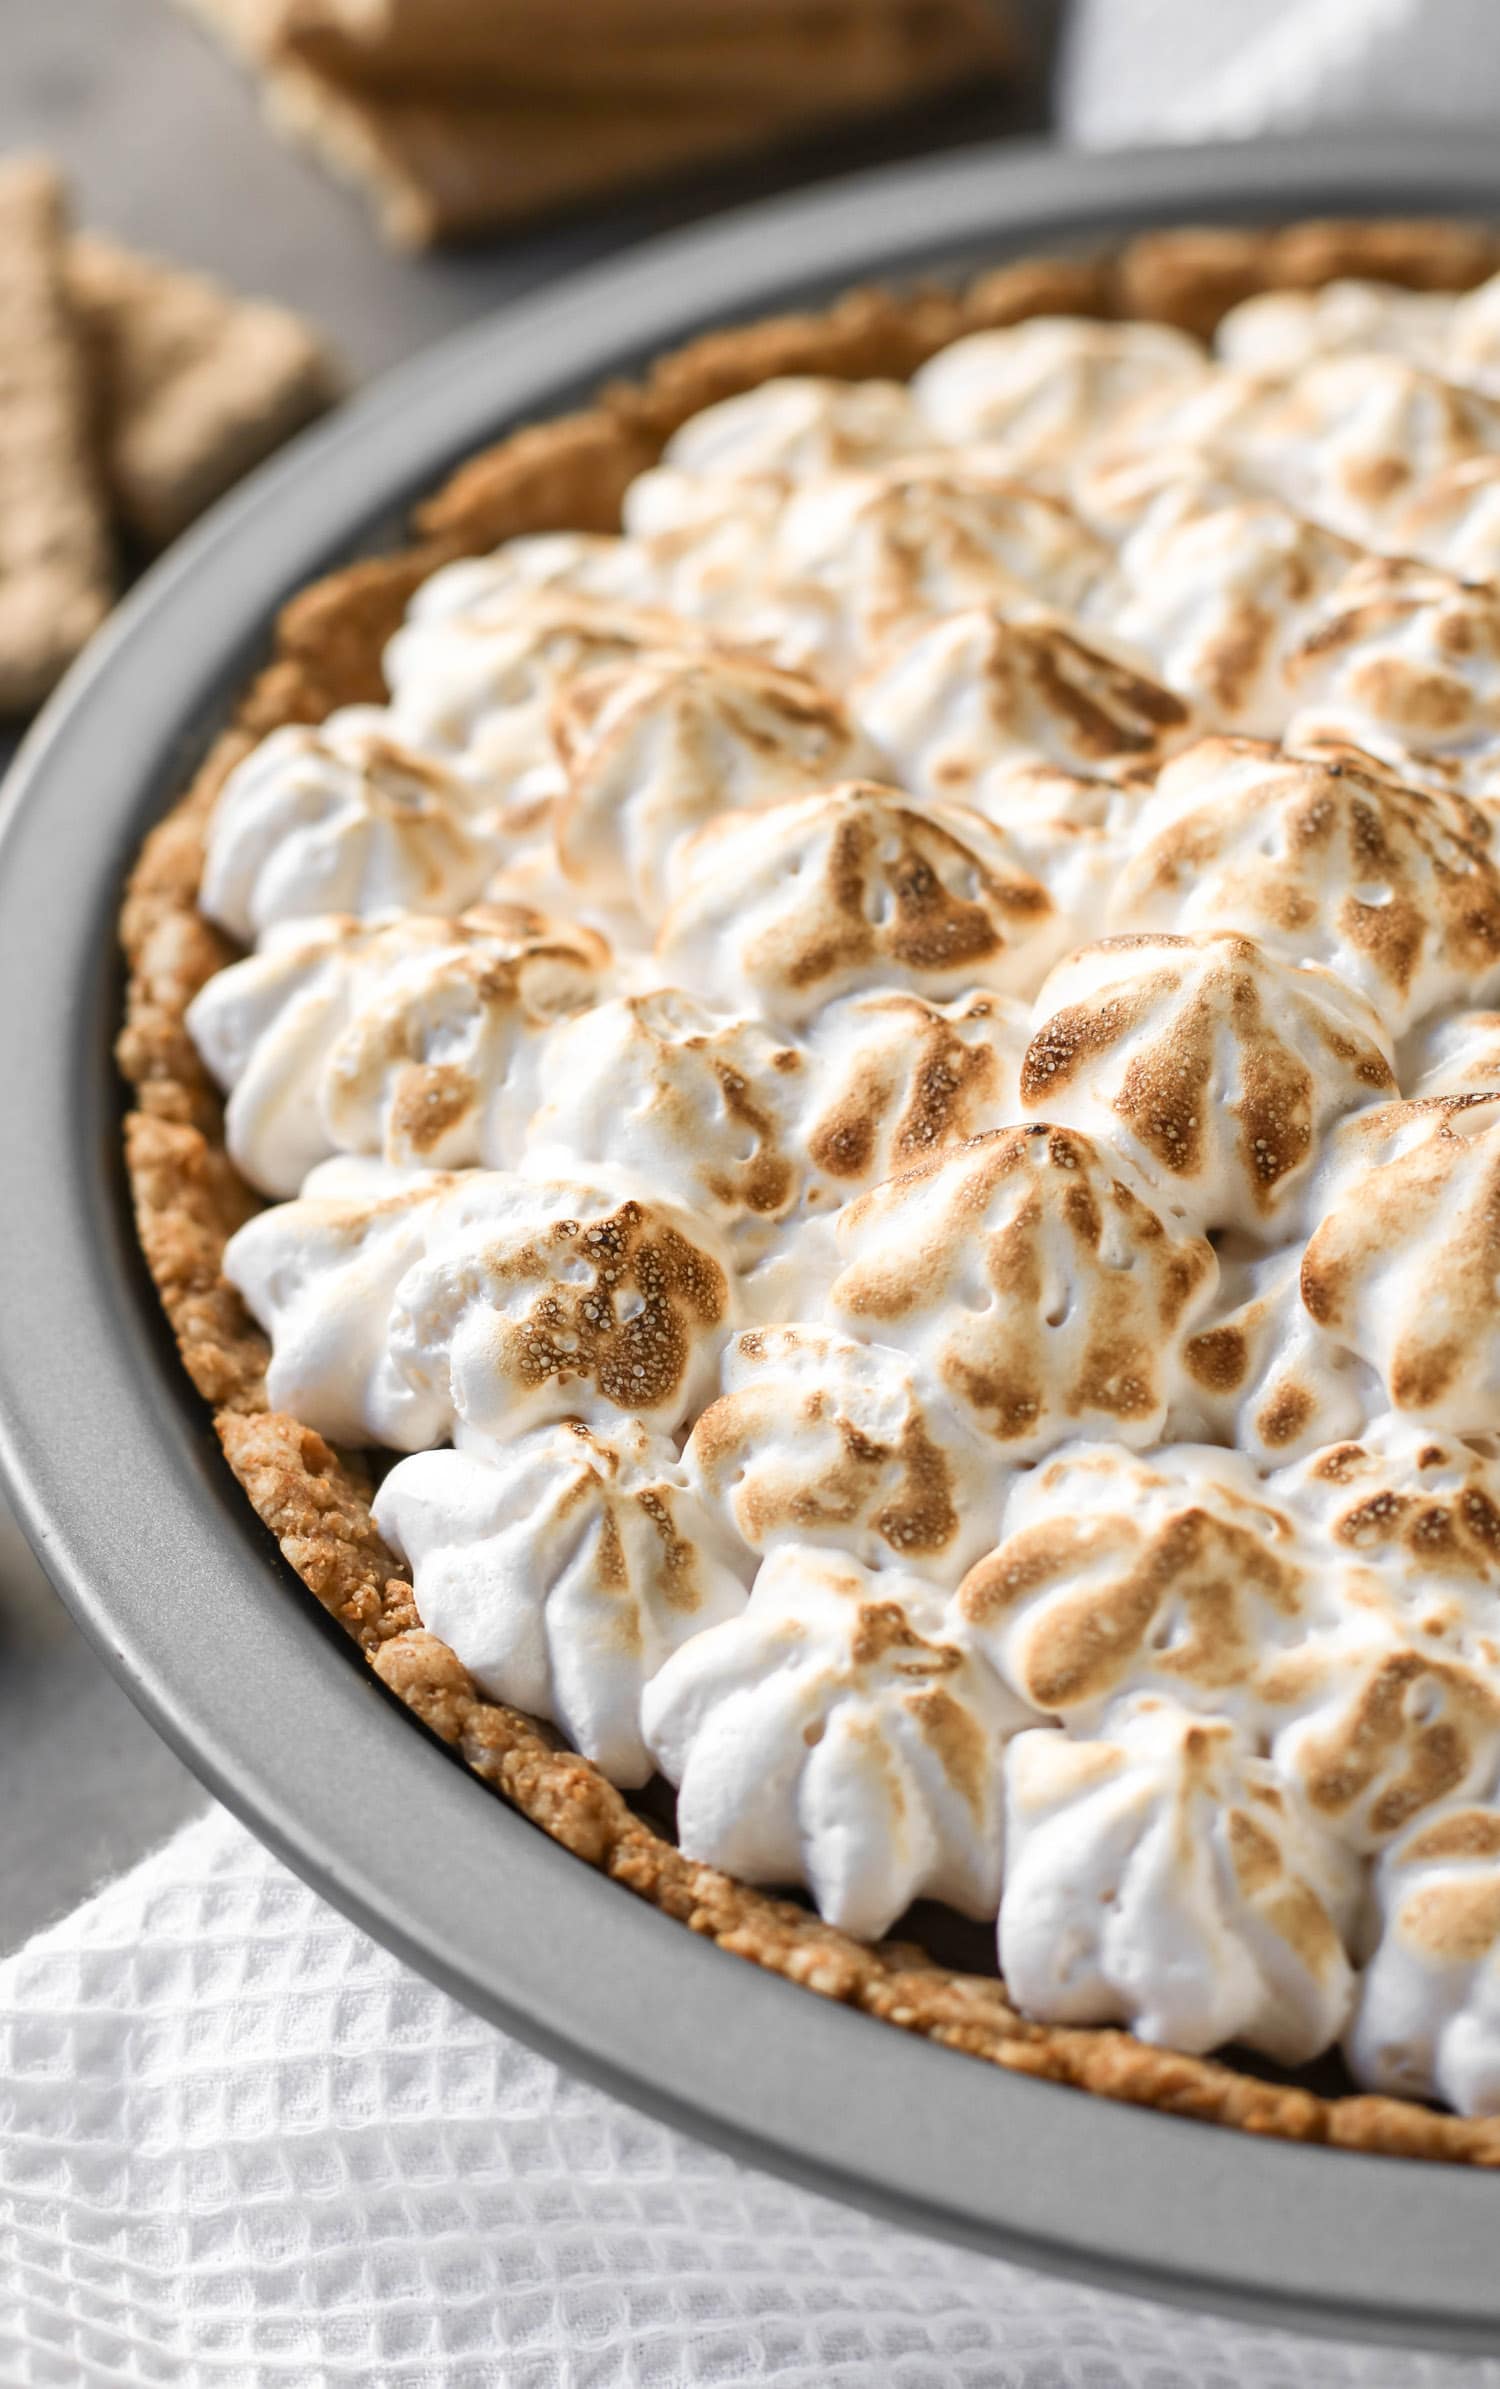 This decadent S'mores Pie has a deliciously comforting graham cracker crust, a rich and creamy chocolate filling, and a homemade marshmallow fluff topping. And it's dairy free and low in sugar! Healthy Dessert Recipes at the Desserts With Benefits Blog